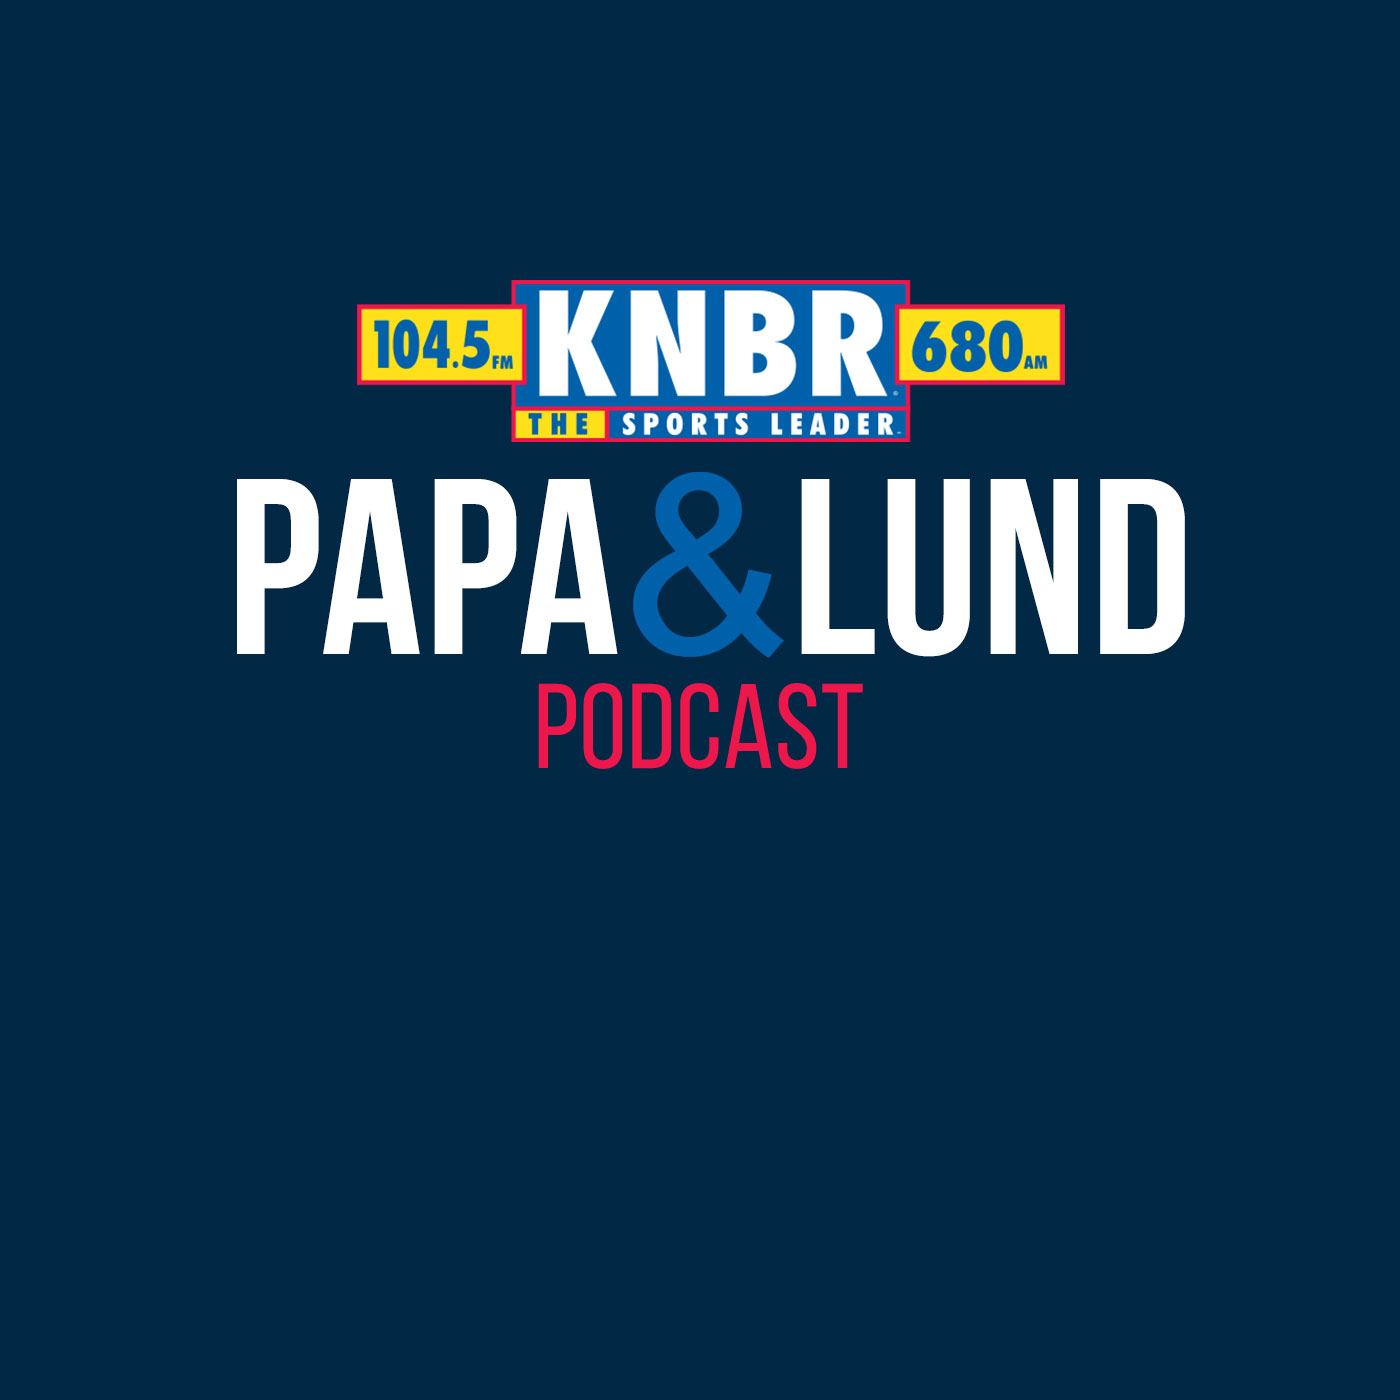 4-23 Papa & Lund Show- Hour 4 - Papa & Lund Four Play + Caboose Pistol